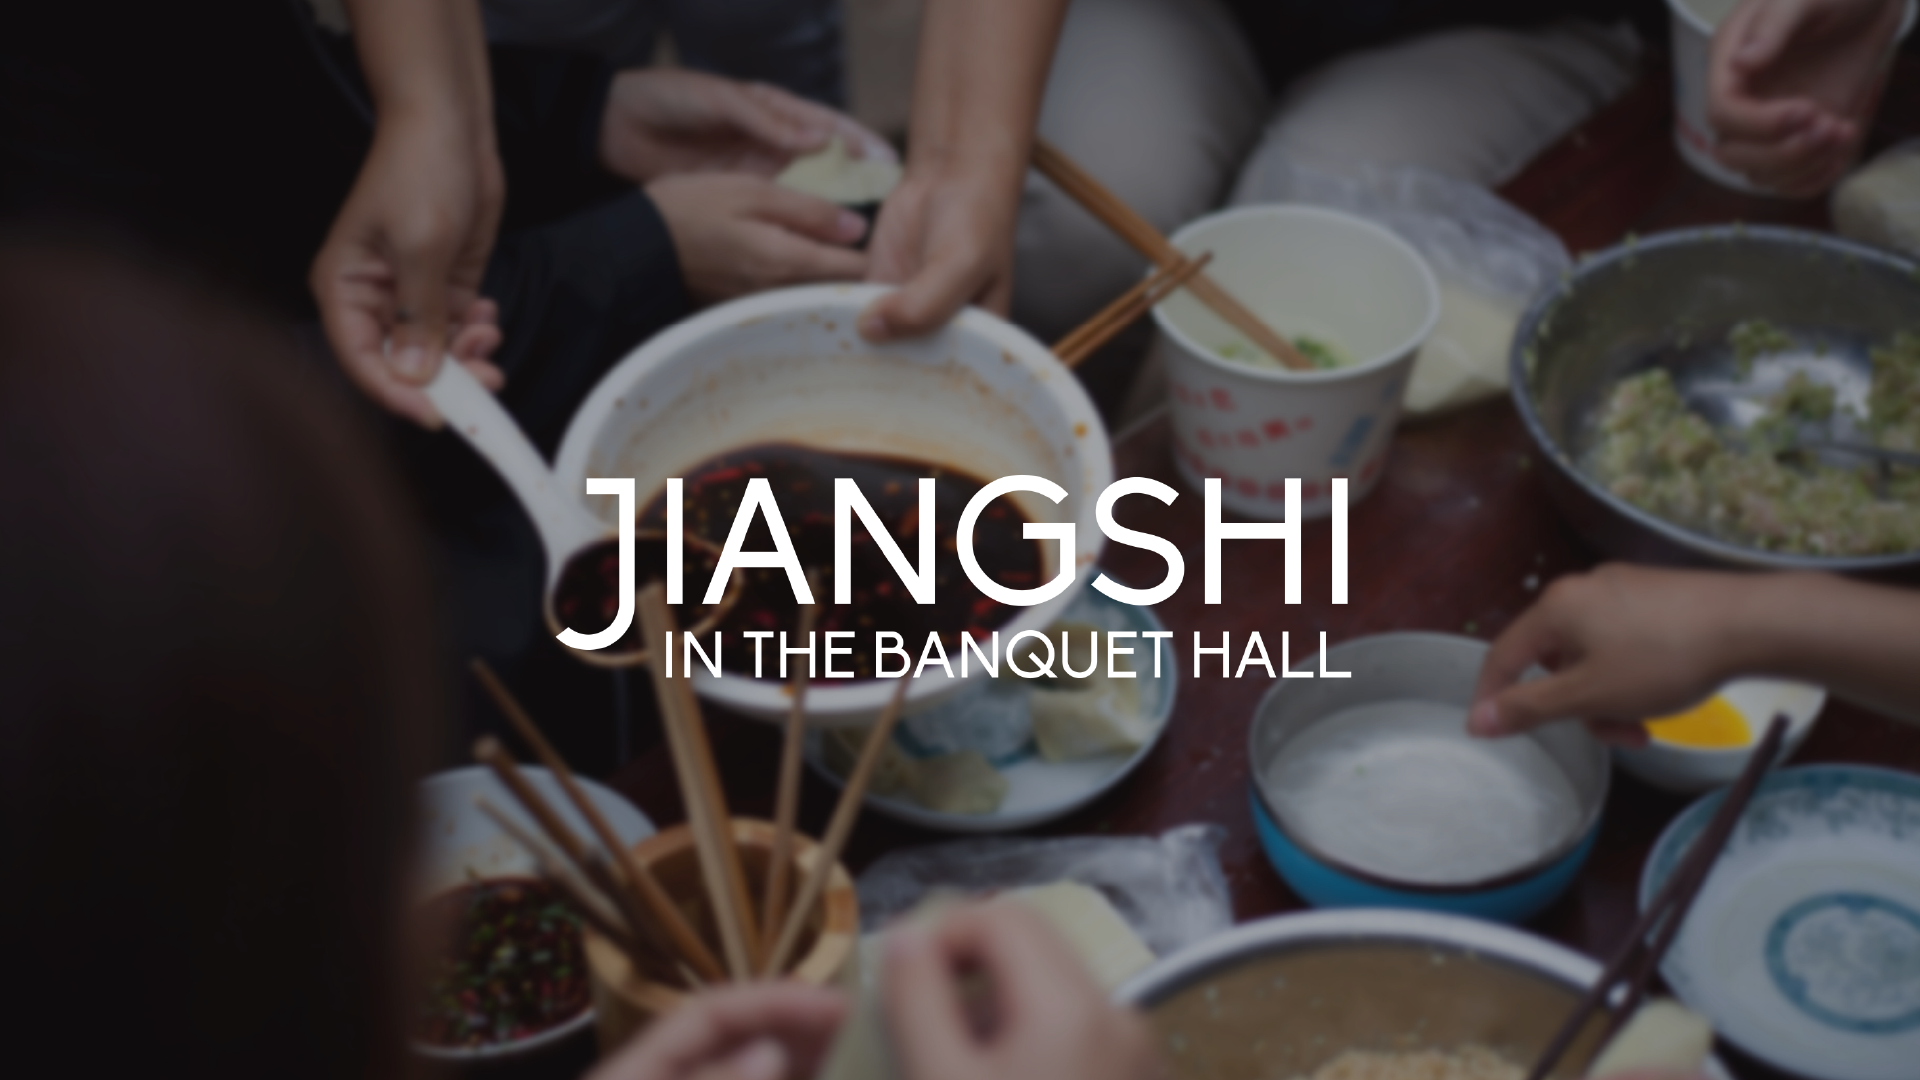 Jiangshi in the Banquet Hall